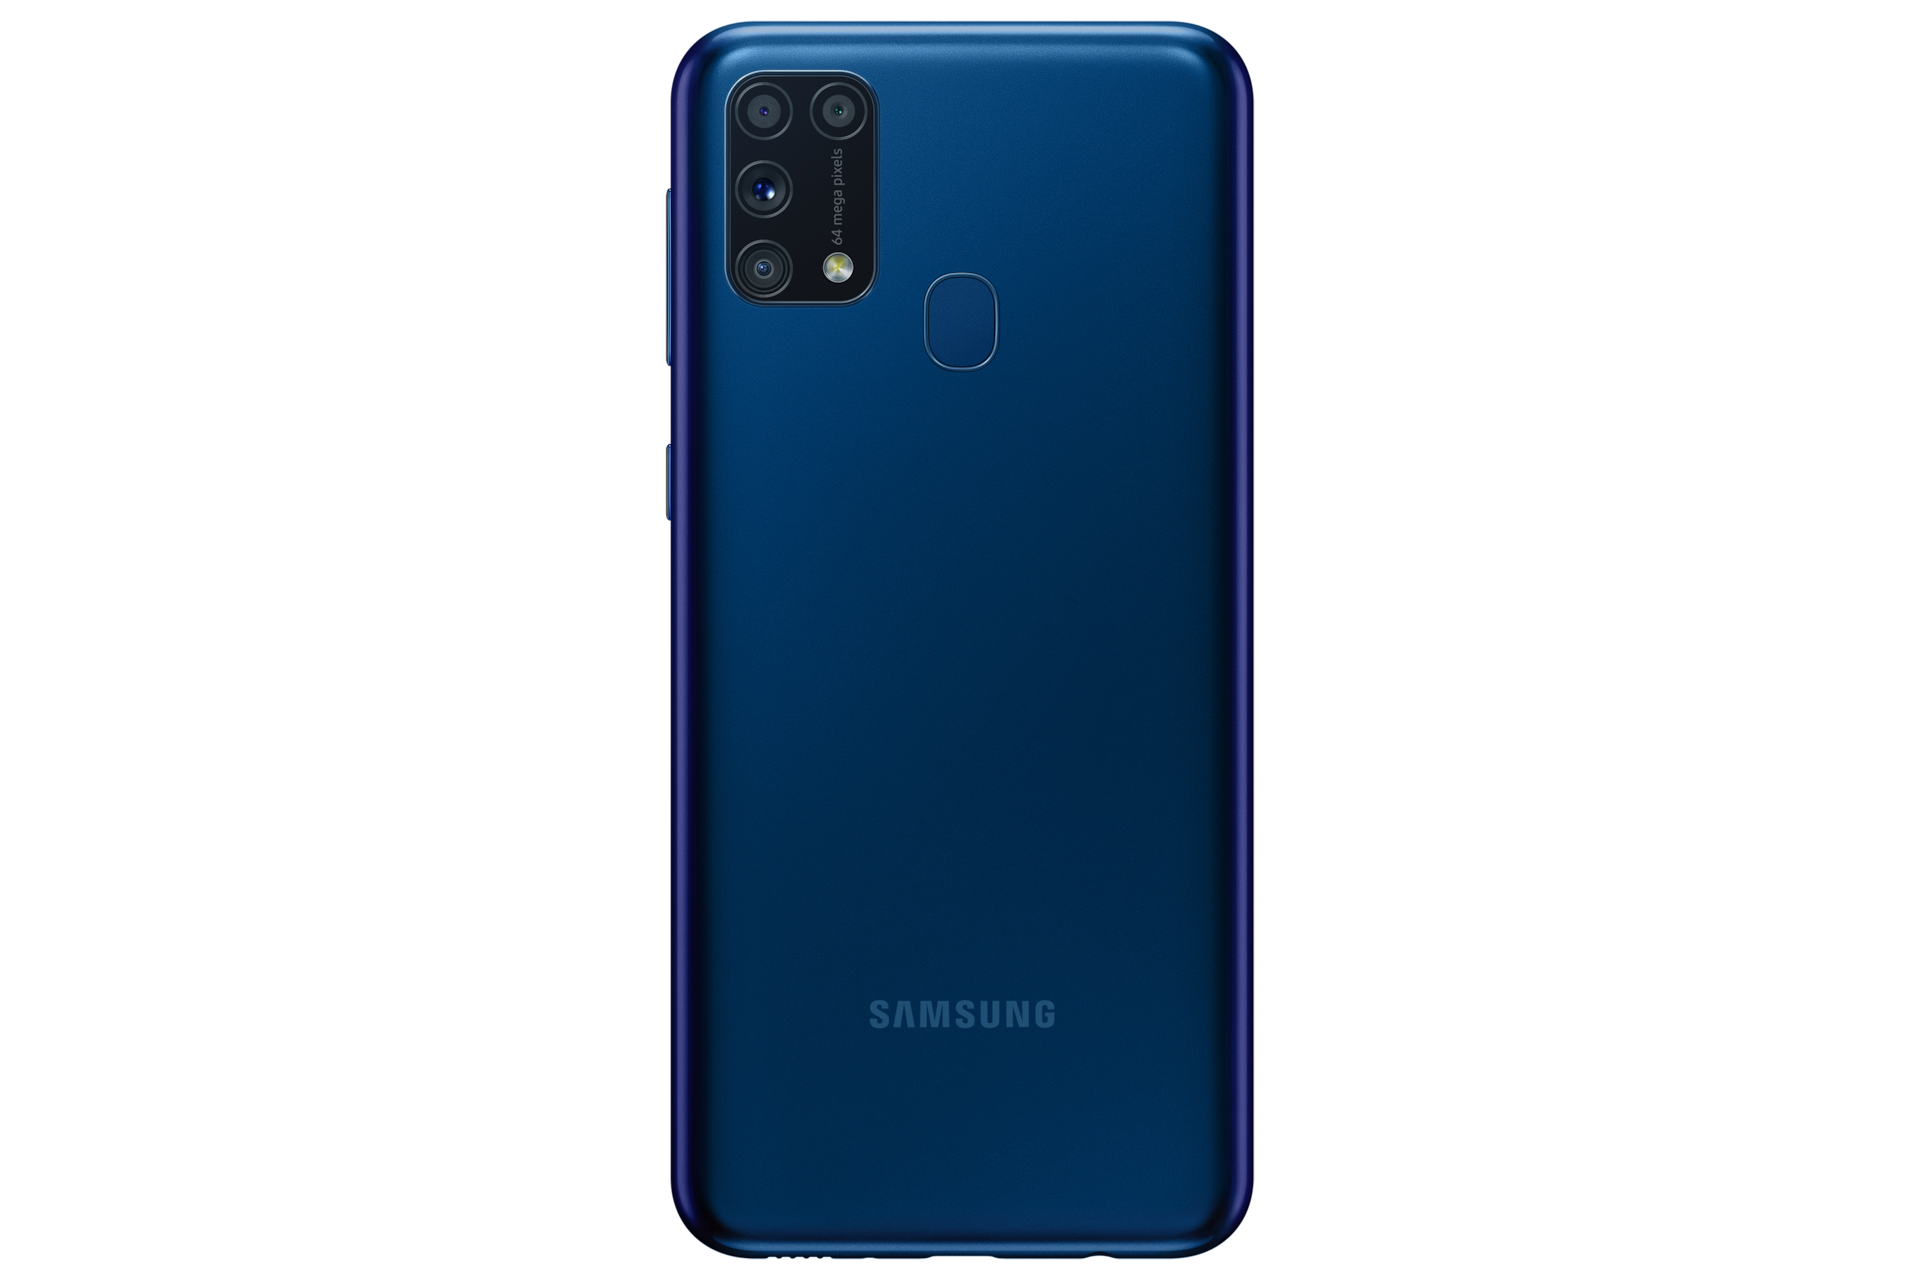 https://images.samsung.com/is/image/samsung/in-galaxy-m31-m315f-6gb-sm-m315fzbdins-backblue-218636833?$PD_GALLERY_L_SHOP_JPG$